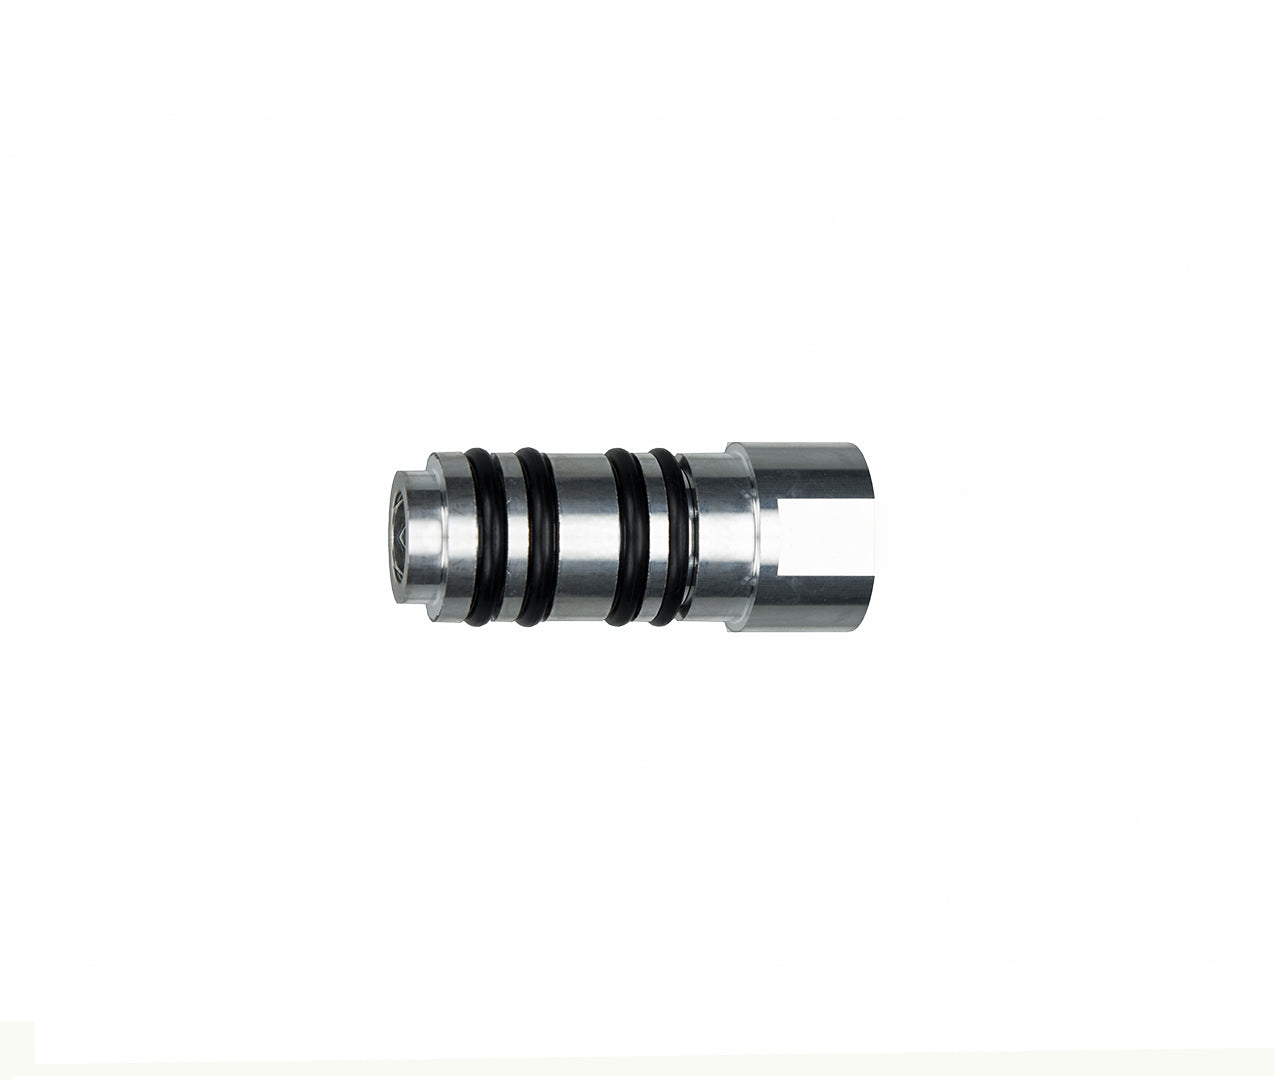 Replacement Swivel Core for Post (SR-360, SRPB-360)